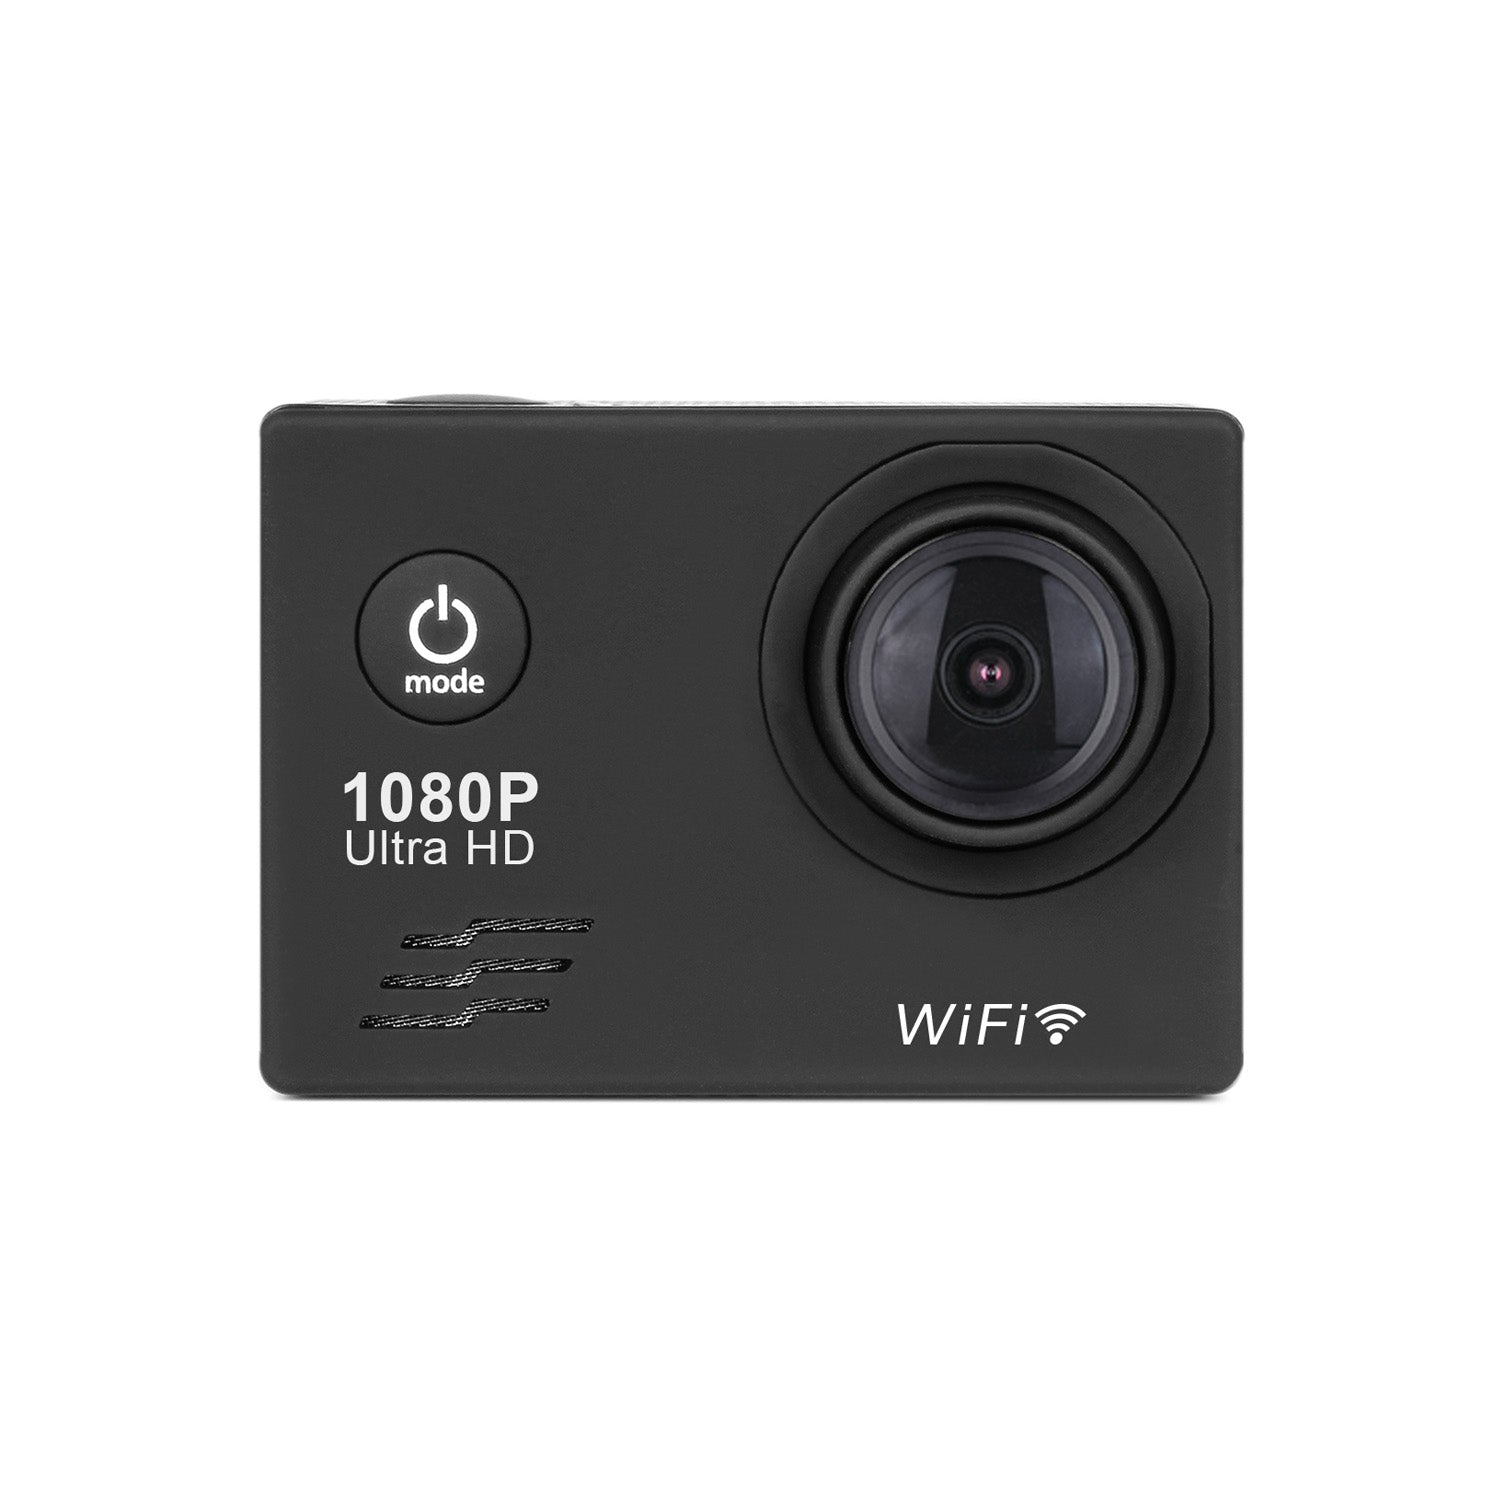 Action Camera 12MP Waterproof 30m Outdoor Sports Video DV Camera 1080P Full  HD LCD Mini Camcorder with 900mAh Rechargeable Batteries and Mounting